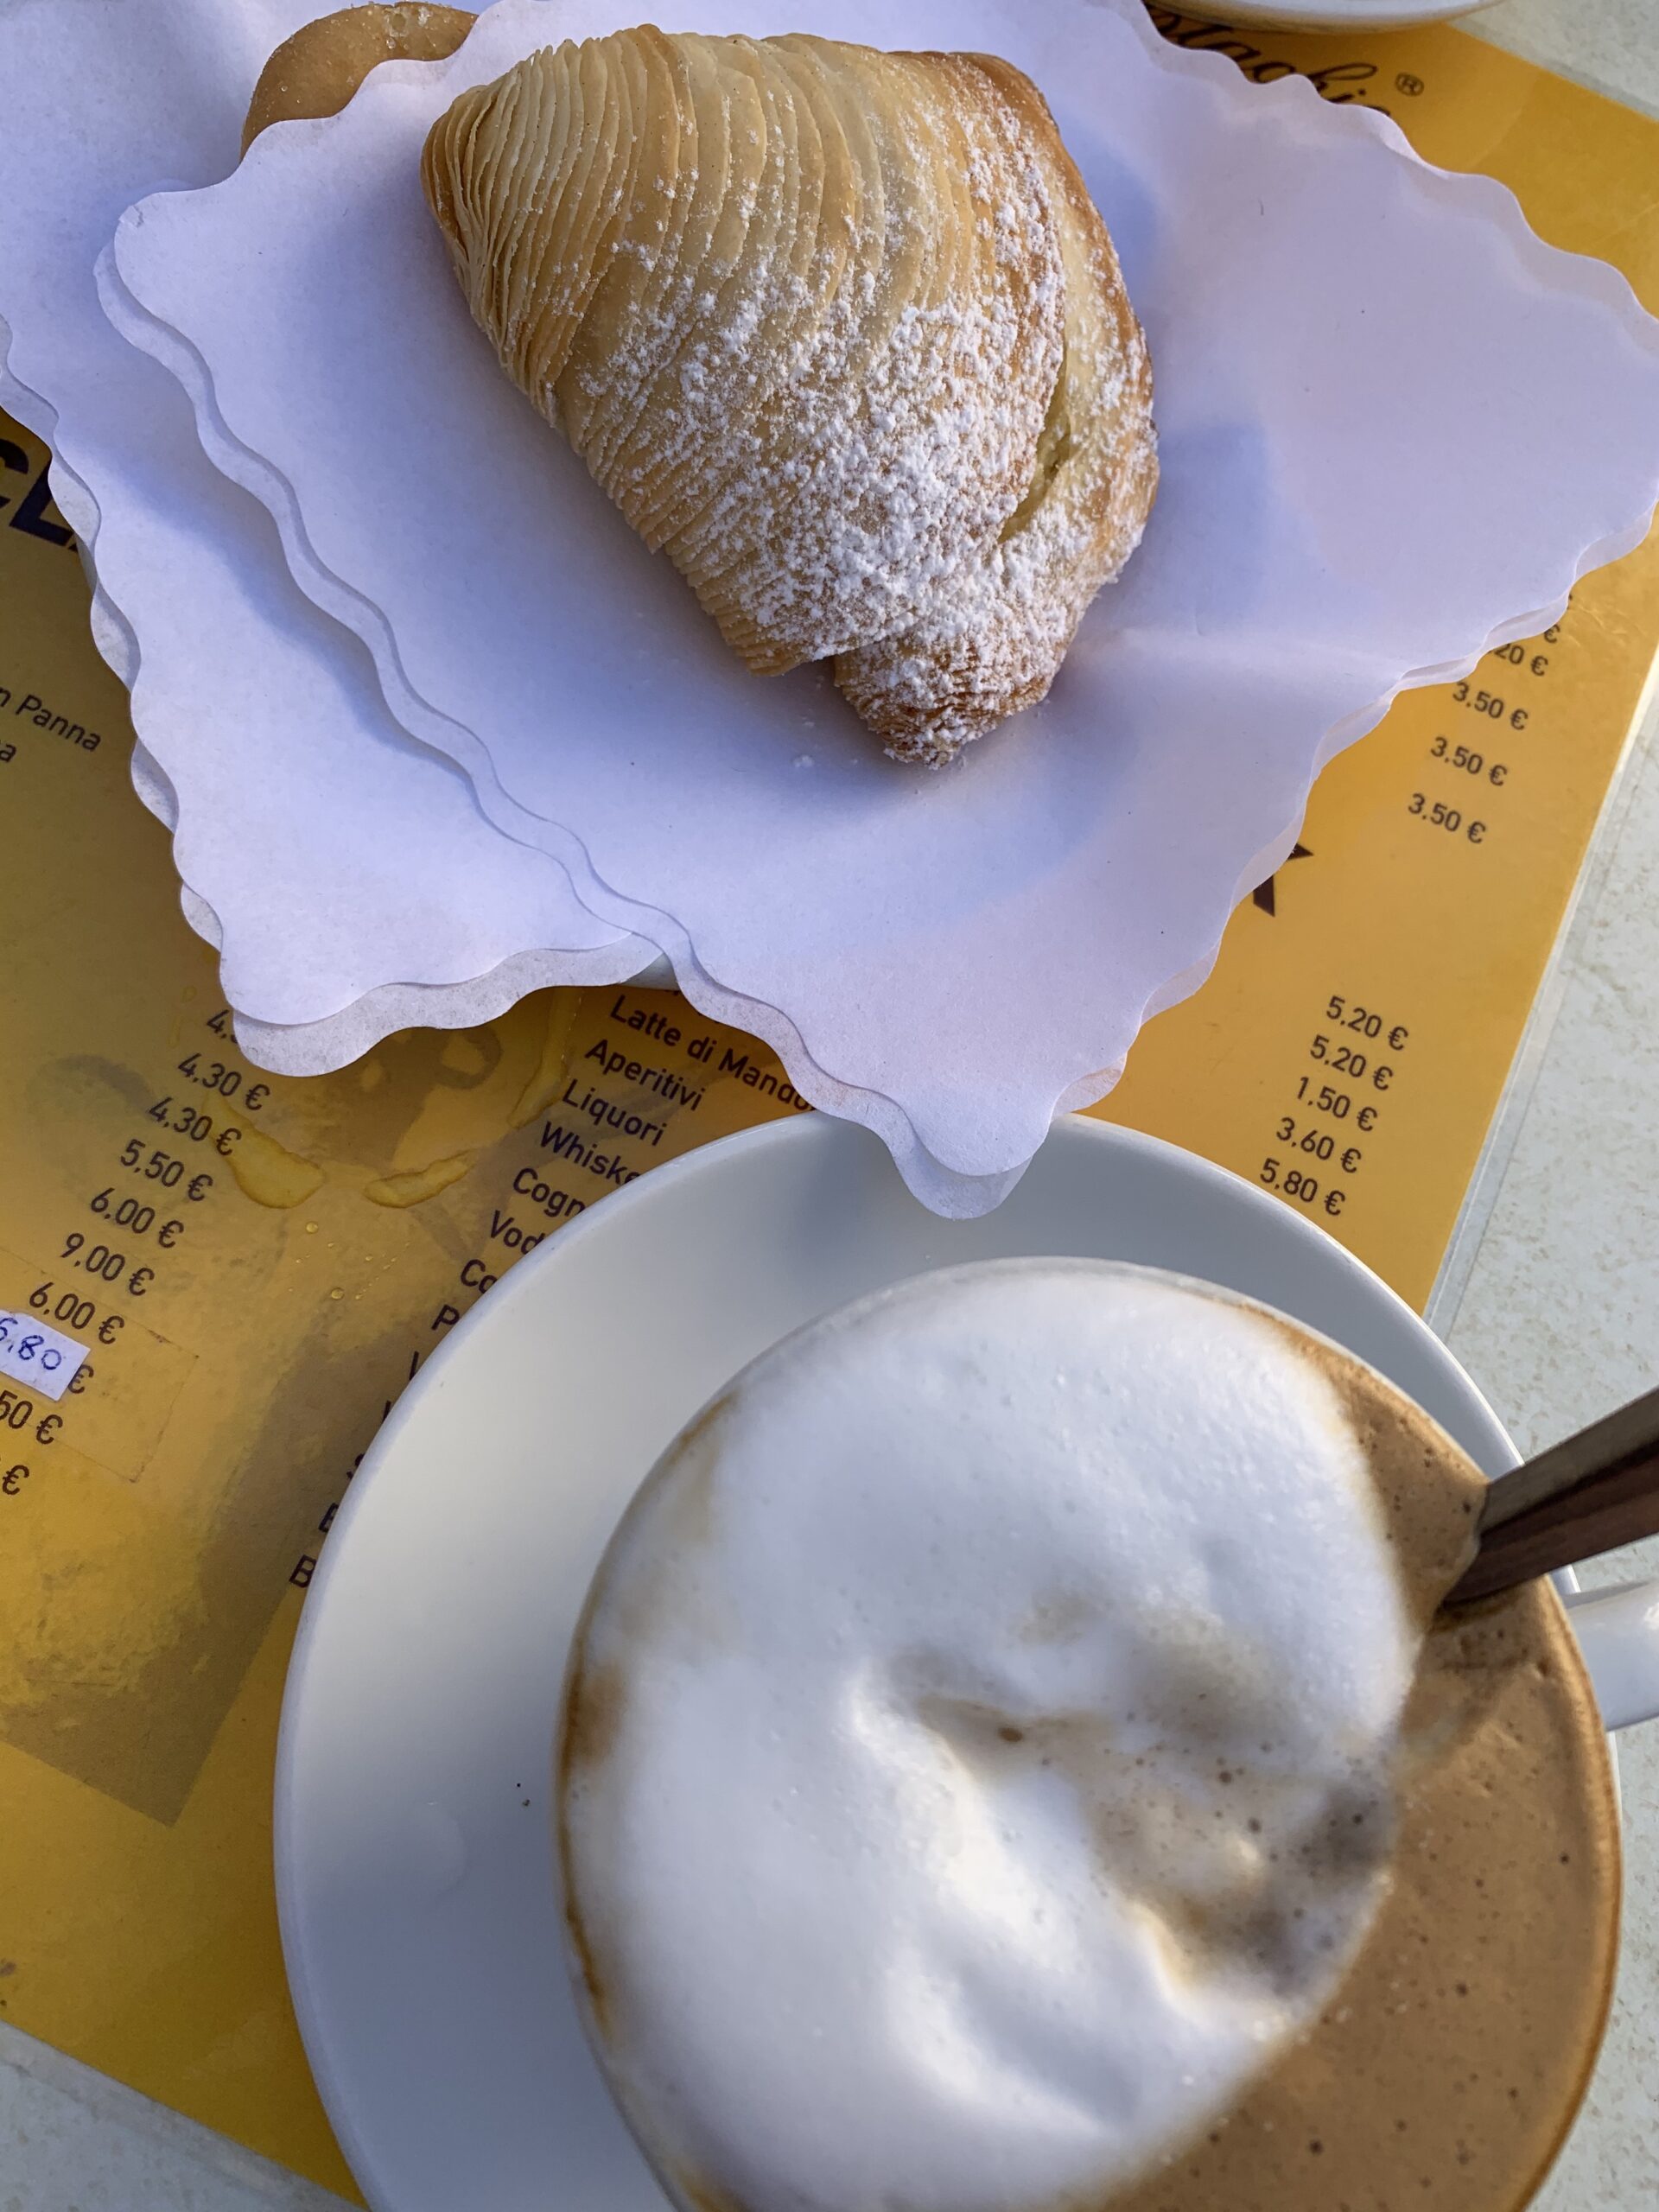 Cafe and Pastry from Sant 'Eustachio Il Caffè